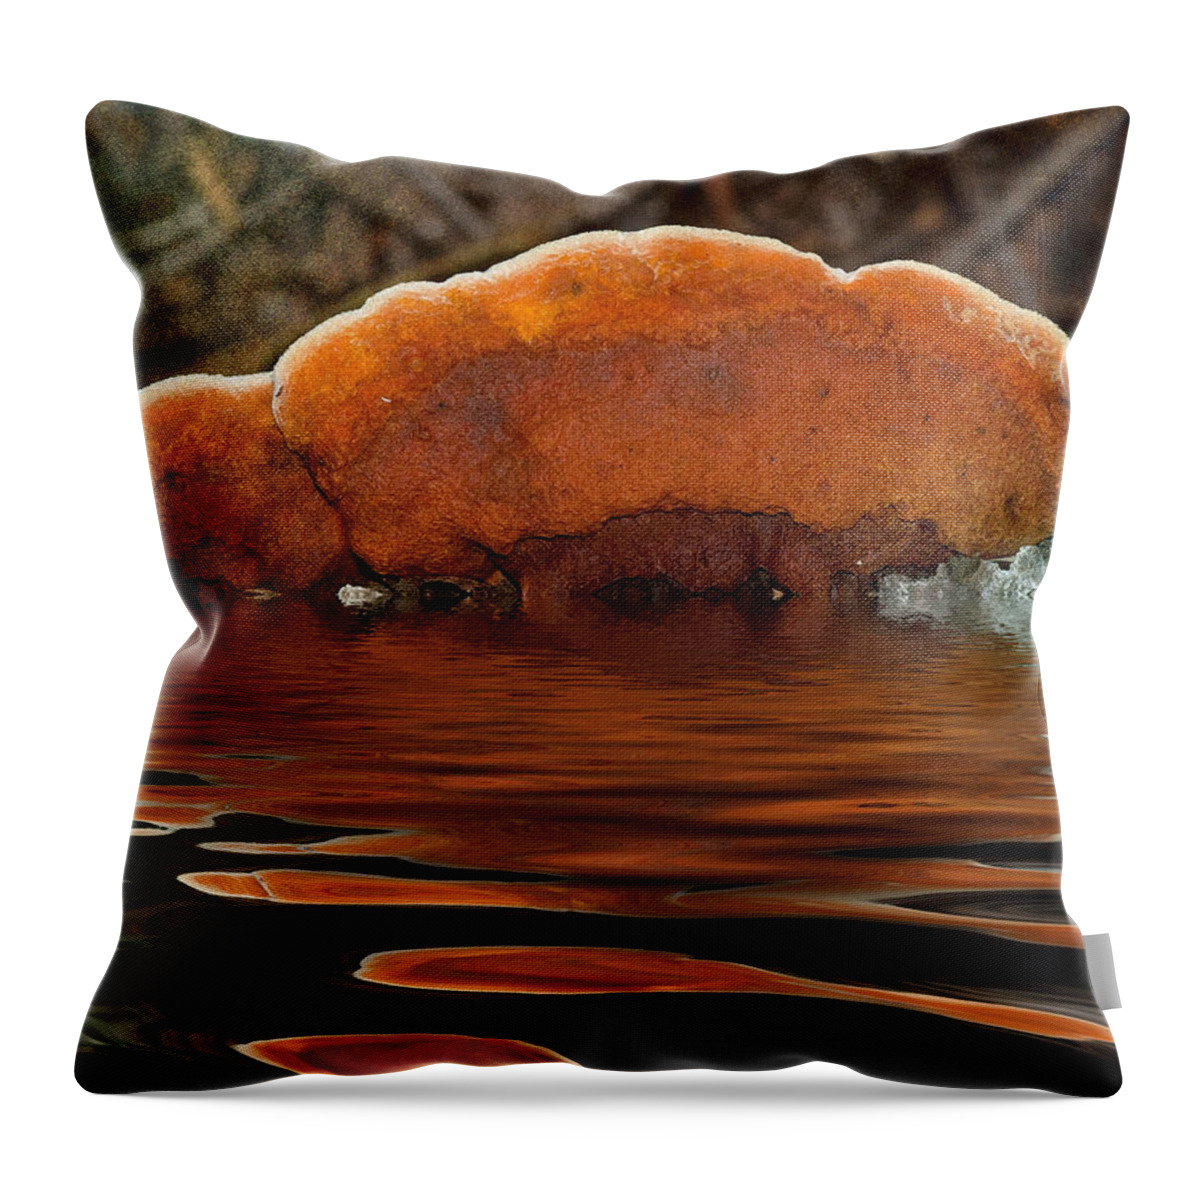 Fungus Throw Pillow featuring the photograph Fungiflection by WB Johnston